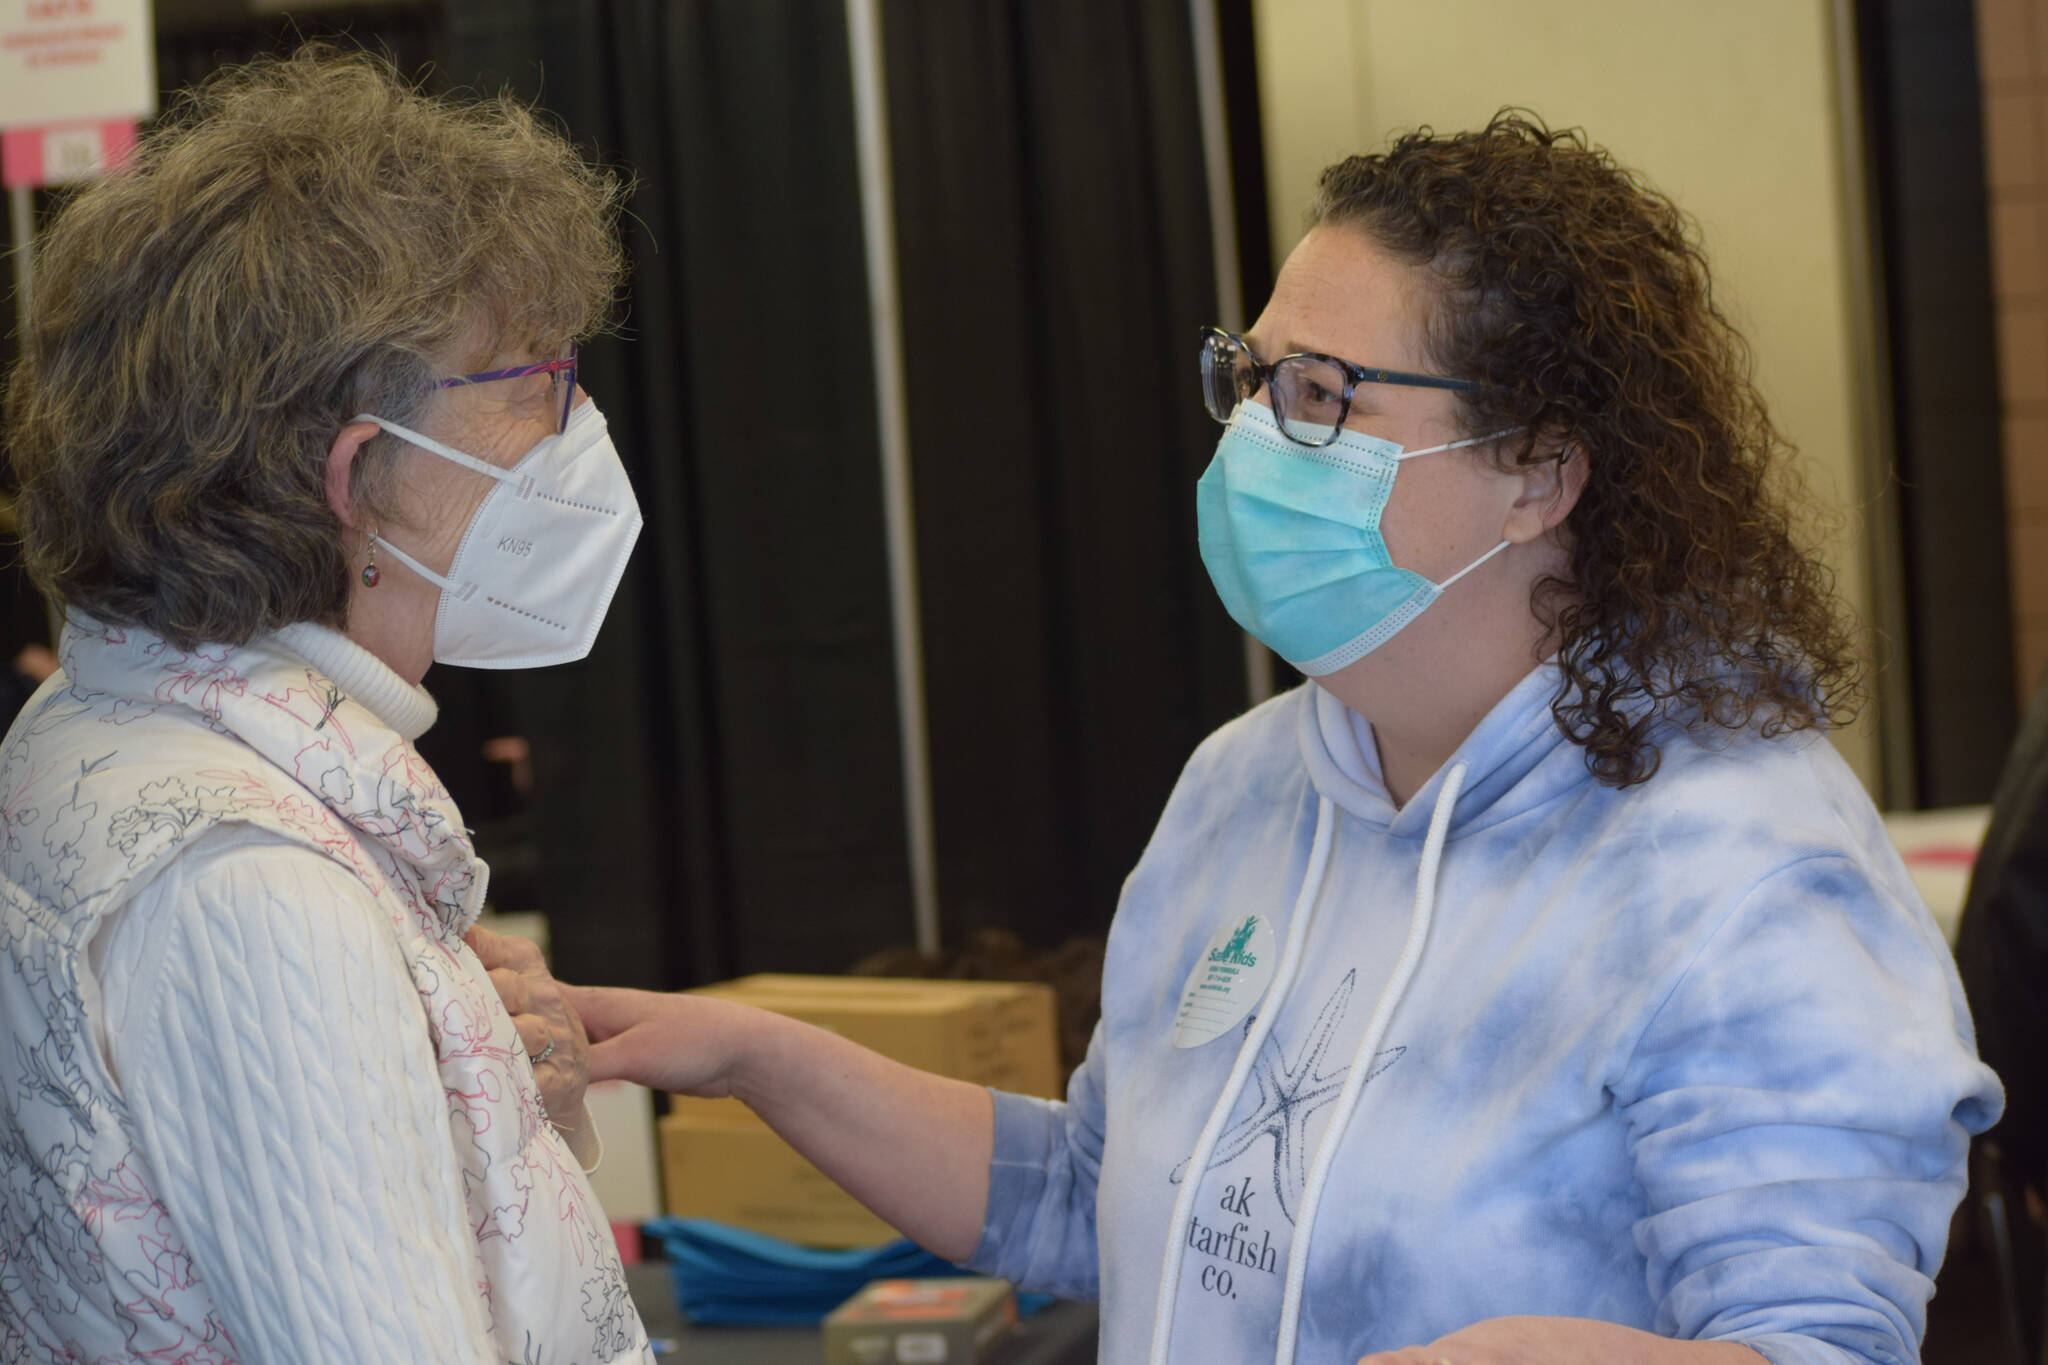 Margie McCord, left, and Natalie Merrick, right, administer services during the Project Homeless Connect event Soldotna Regional Sports Complex in Soldotna on Wednesday, Jan. 26, 2022. (Camille Botello/Peninsula Clarion)